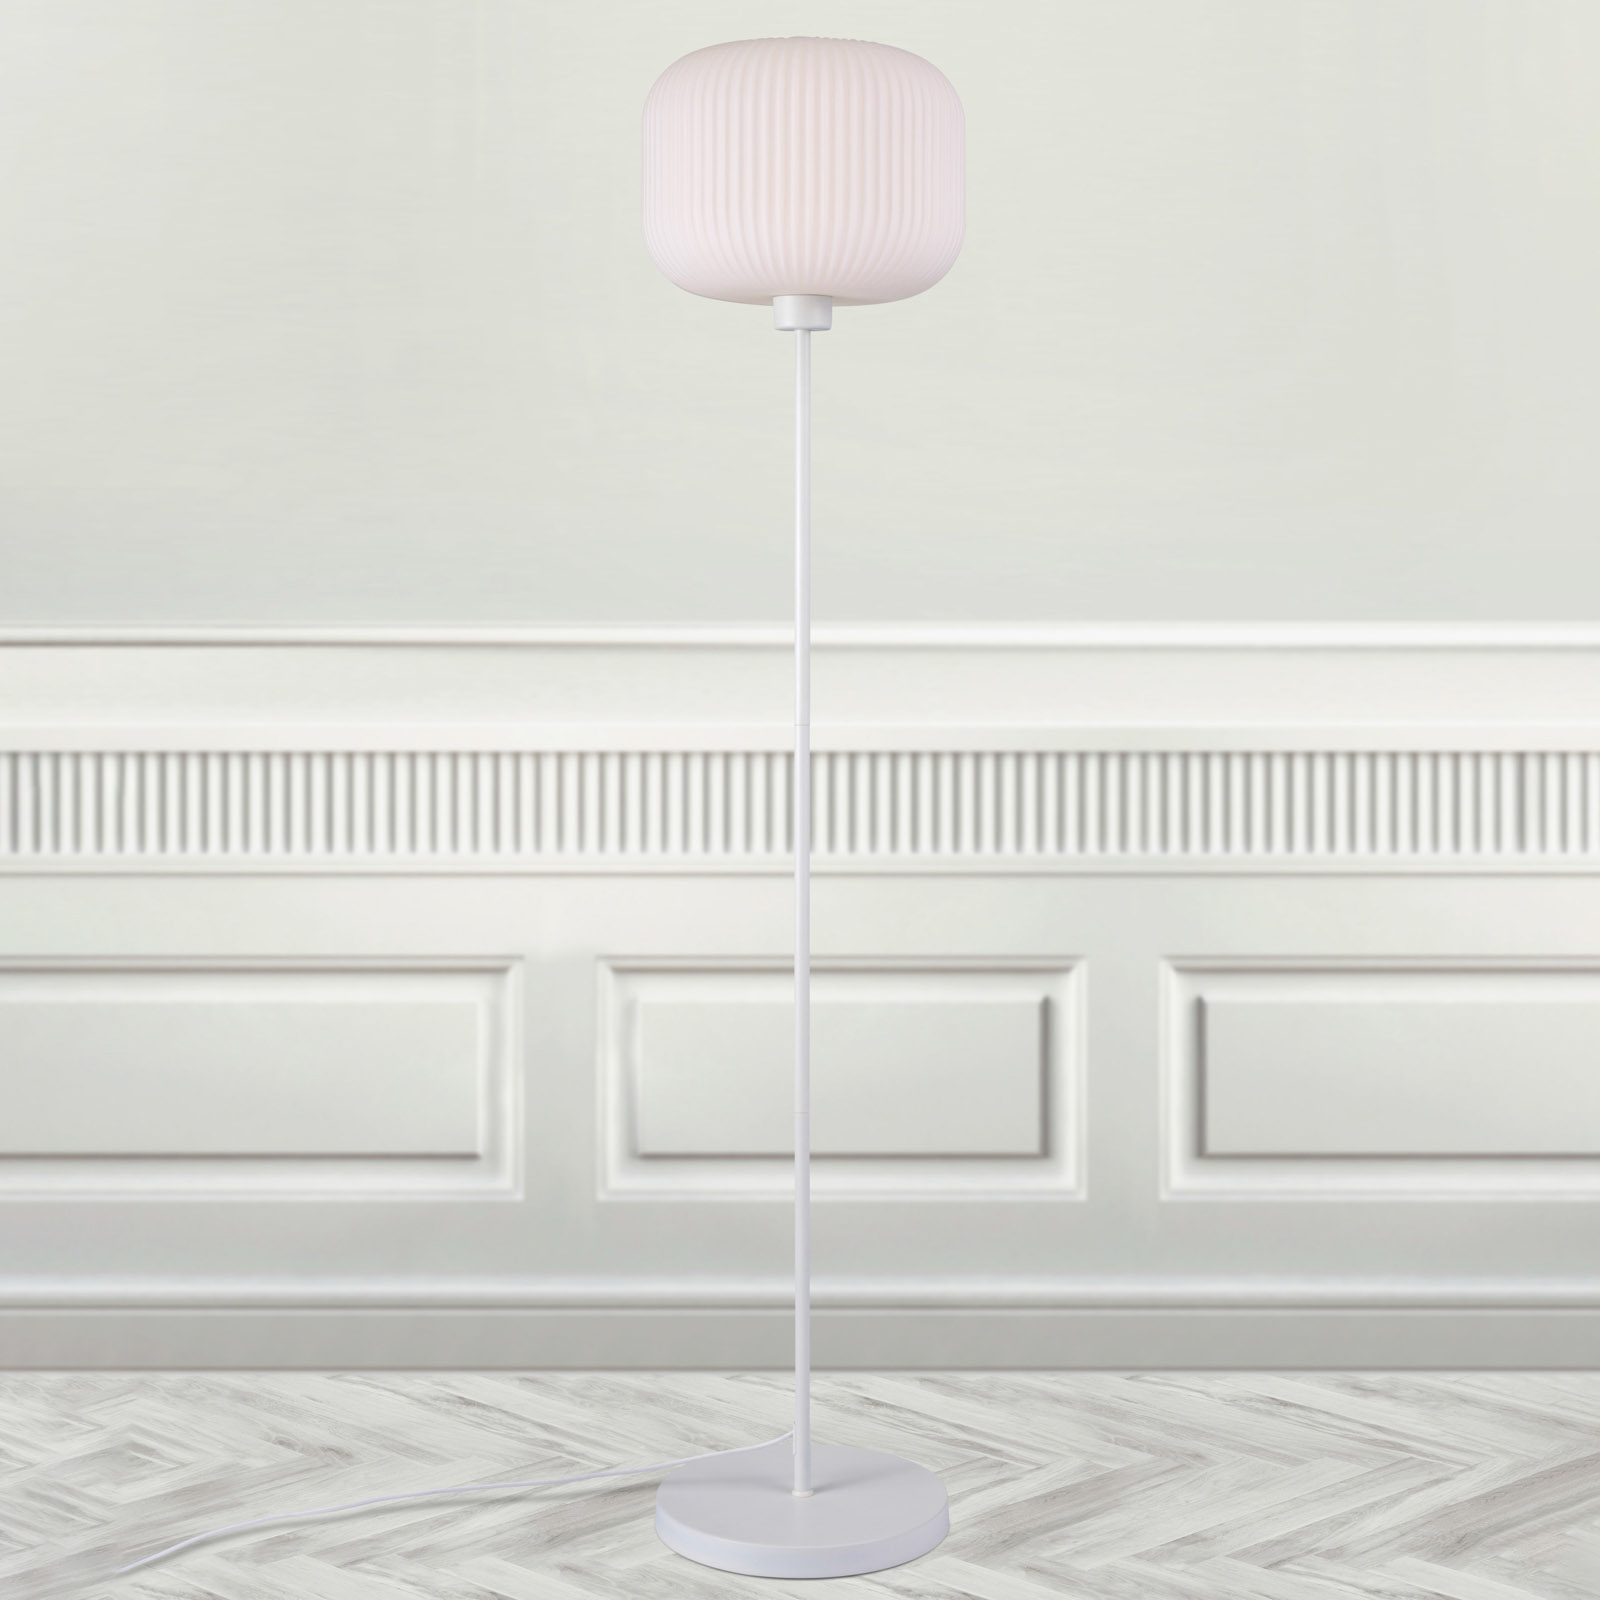 Milford floor lamp with white glass lampshade